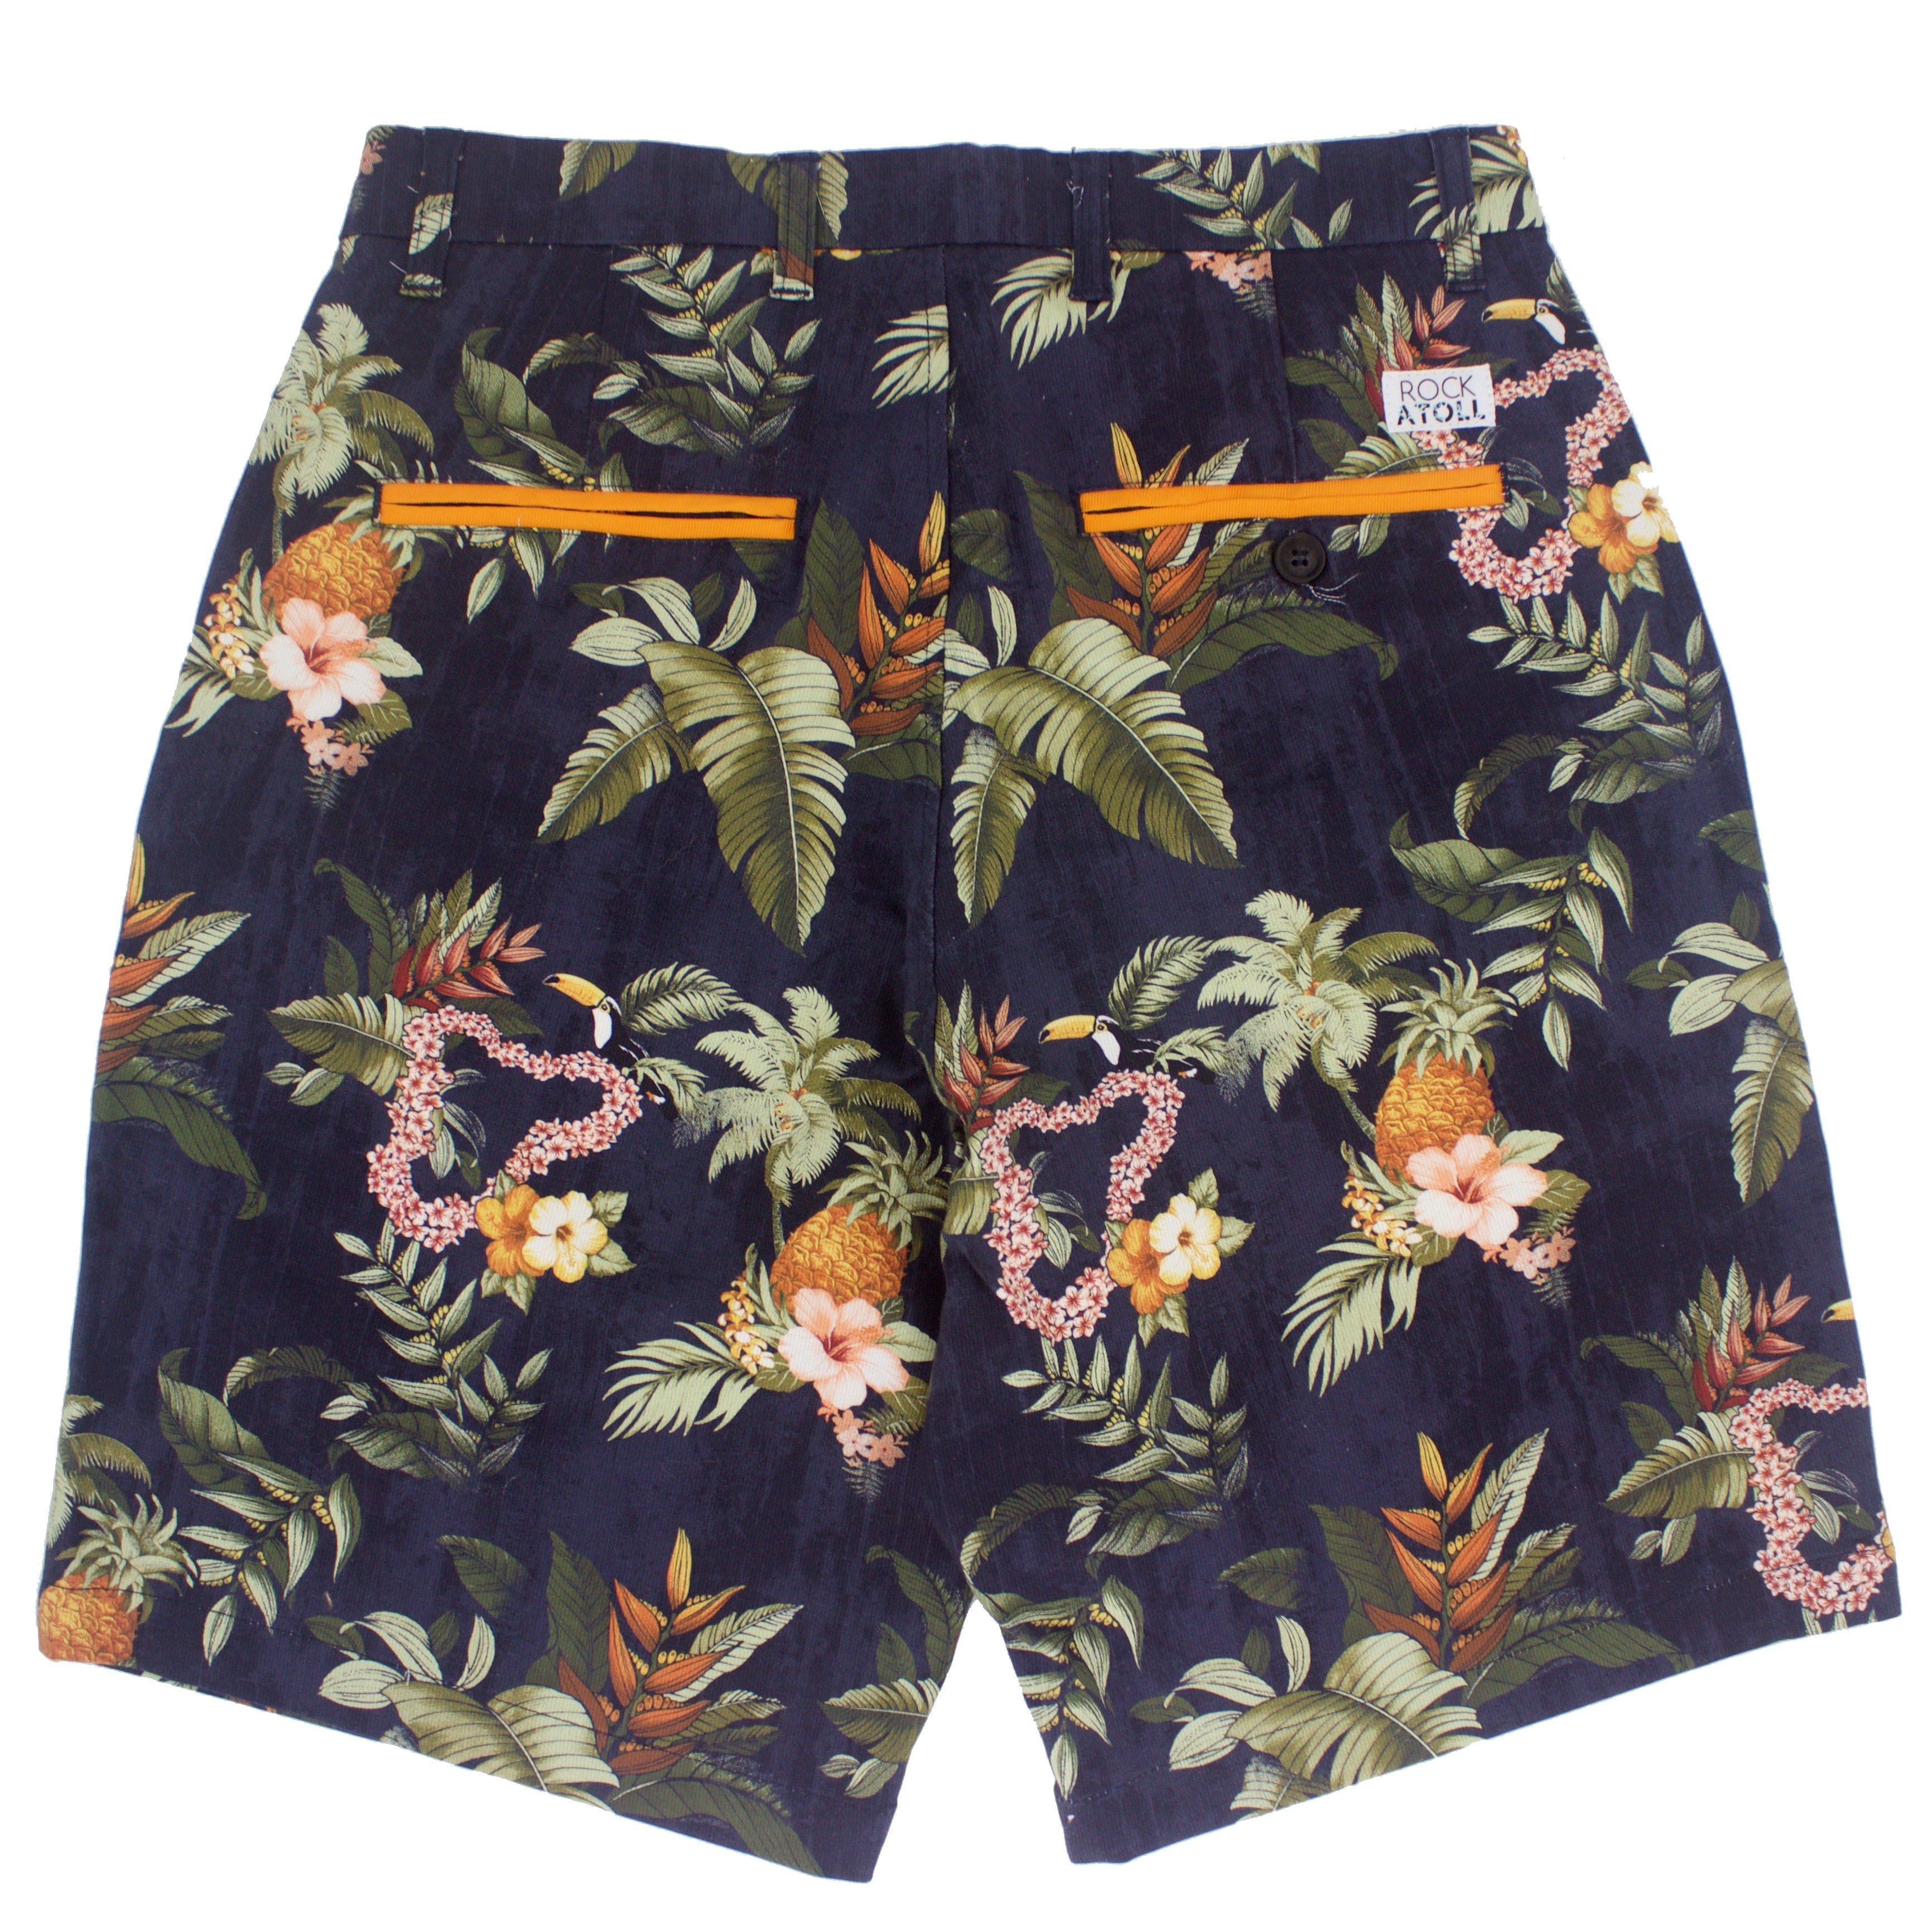 Crazy Golf Shorts for Men with Toucans and Palm Leaves